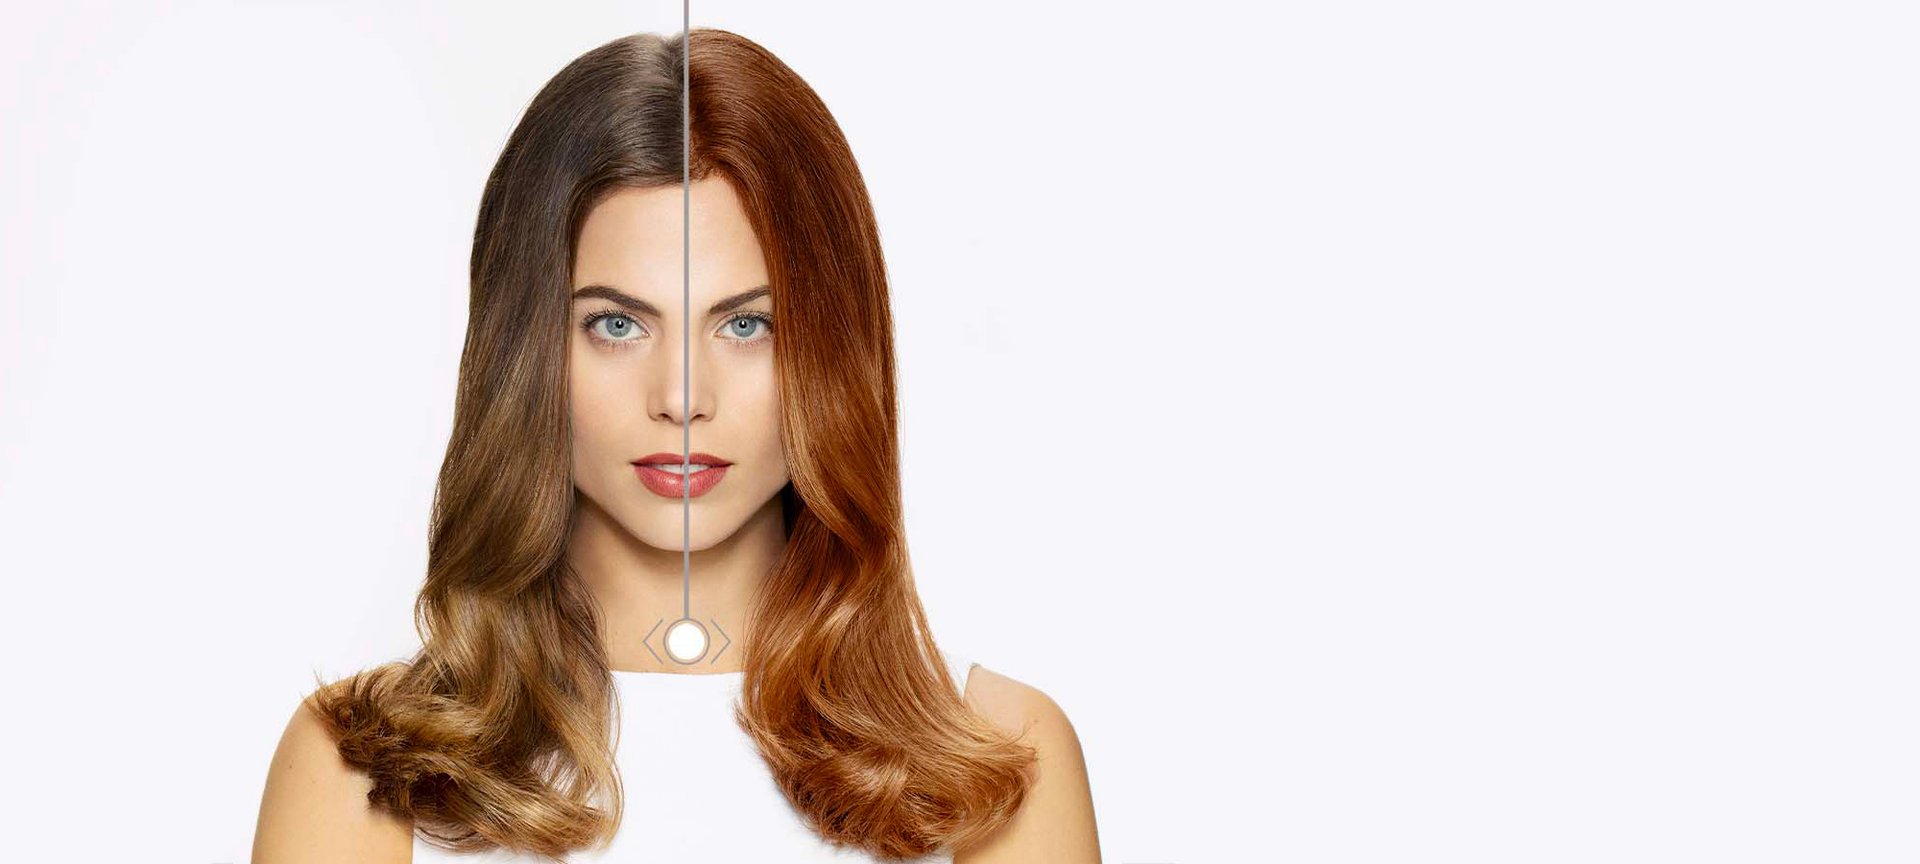 Virtual Hair Colour Try On, Shade Finder